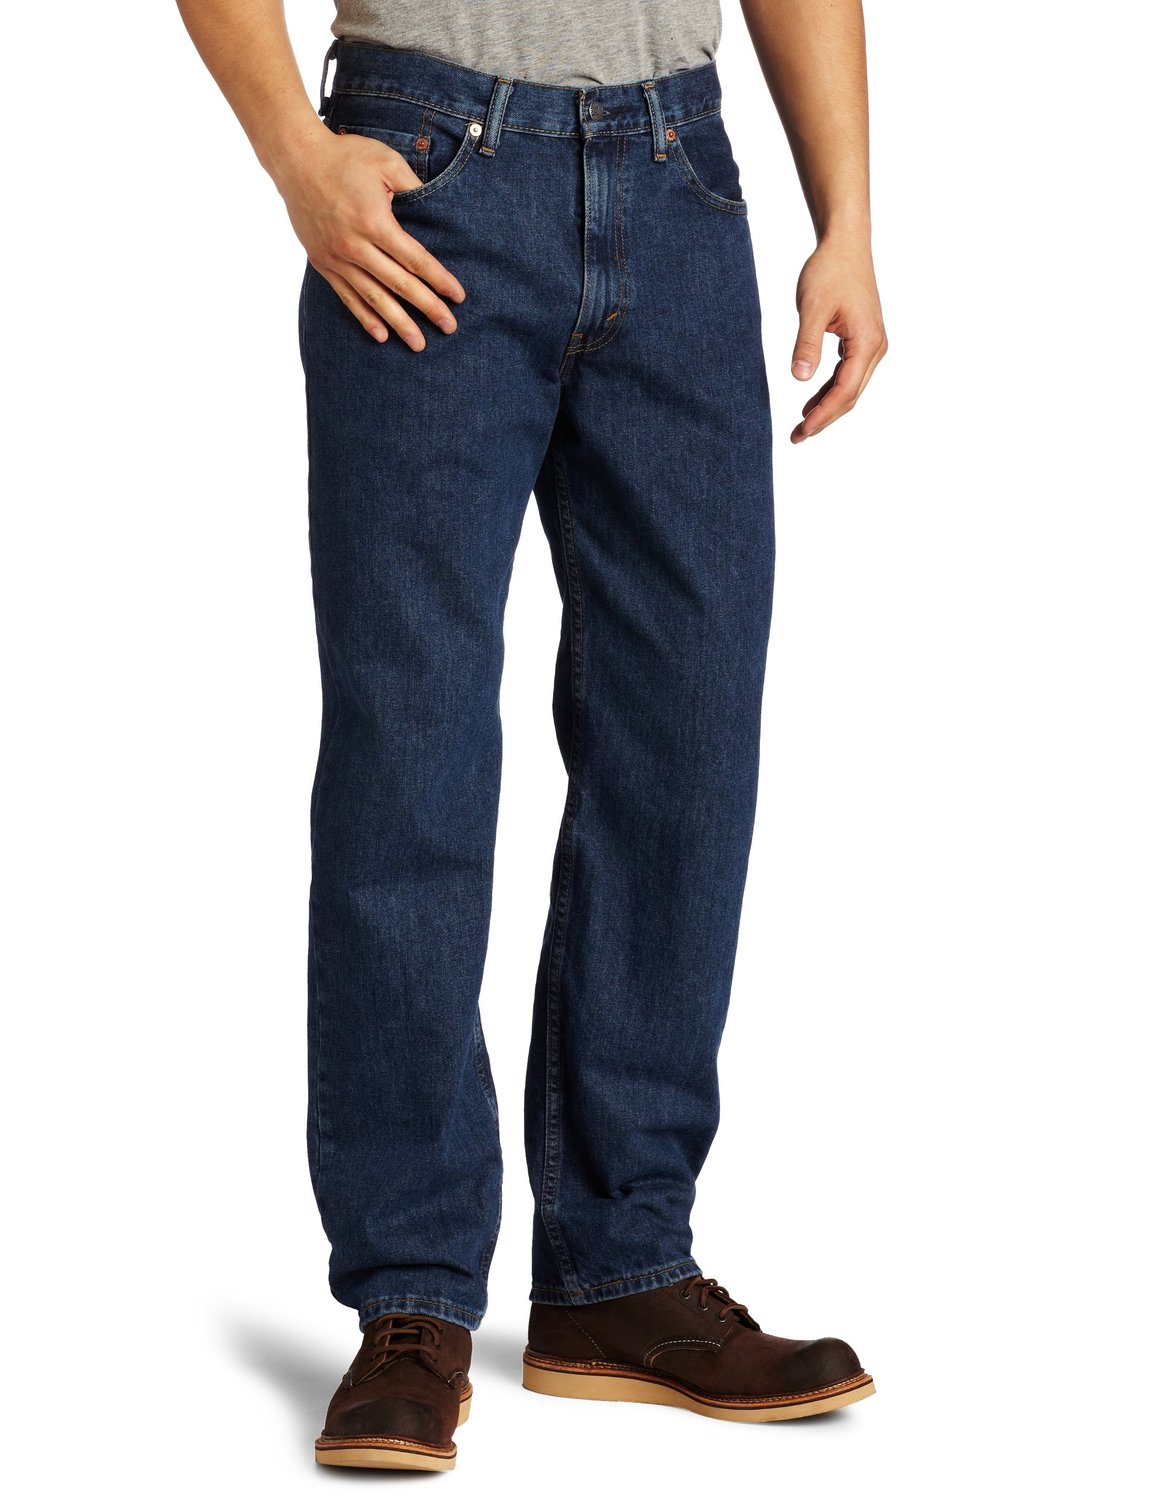 mens levis relaxed fit jeans